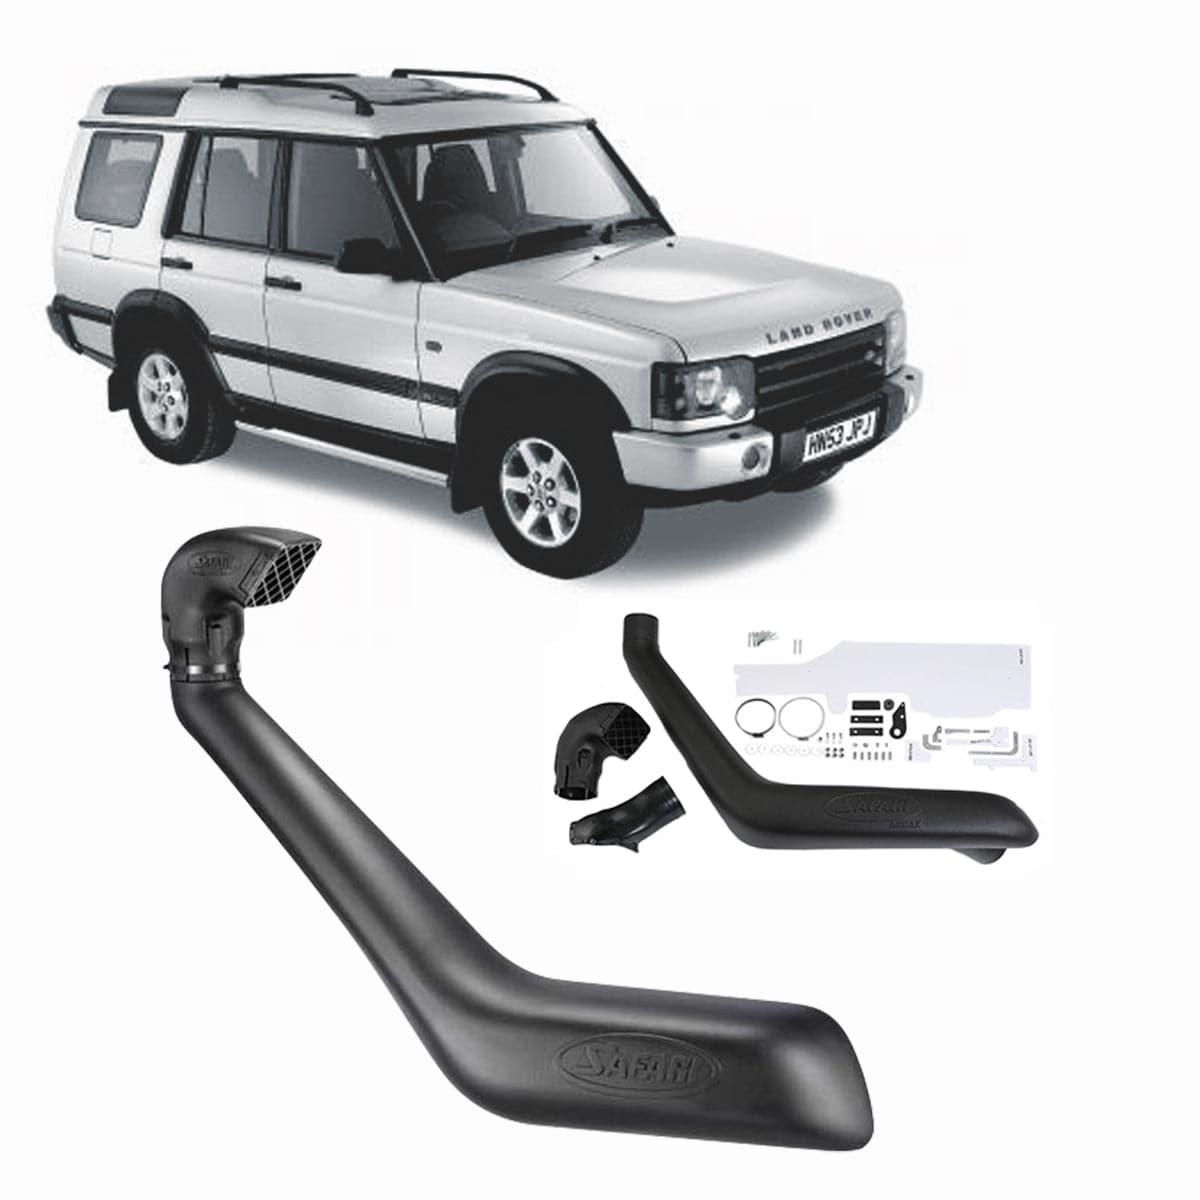 Safari Snorkel for Land Rover Discovery (01/1999 - 2005)